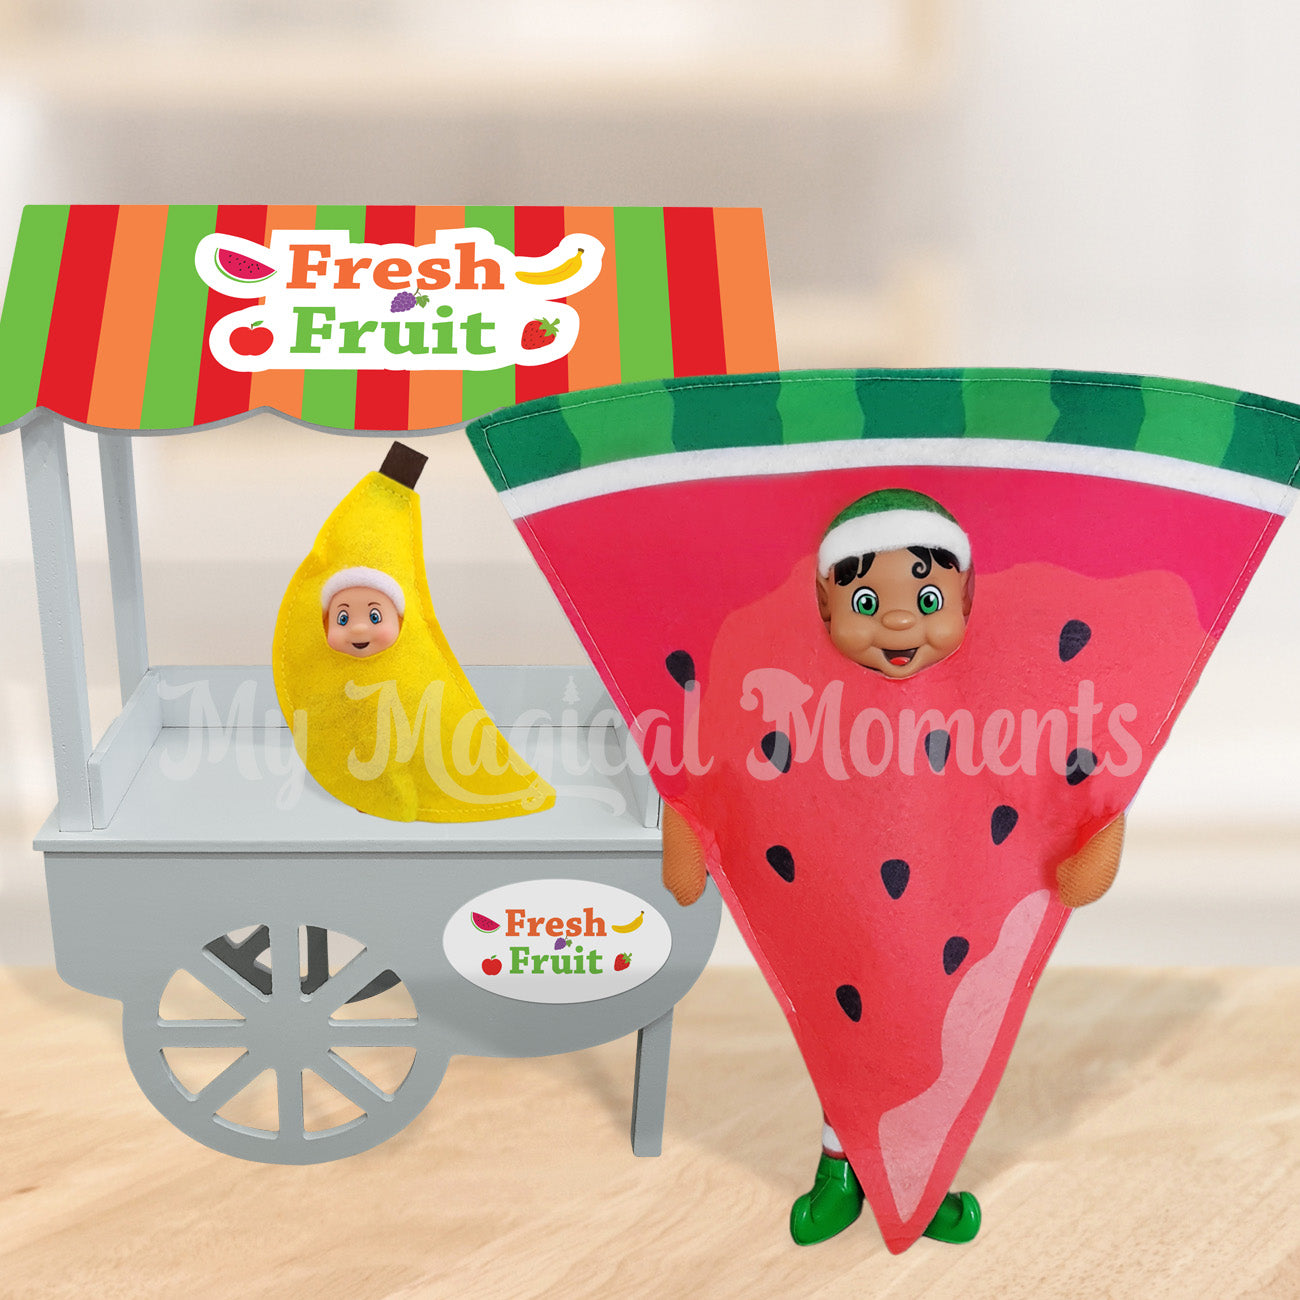 Elf wearing a watermelon costume selling fresh fruit with a elf baby banana